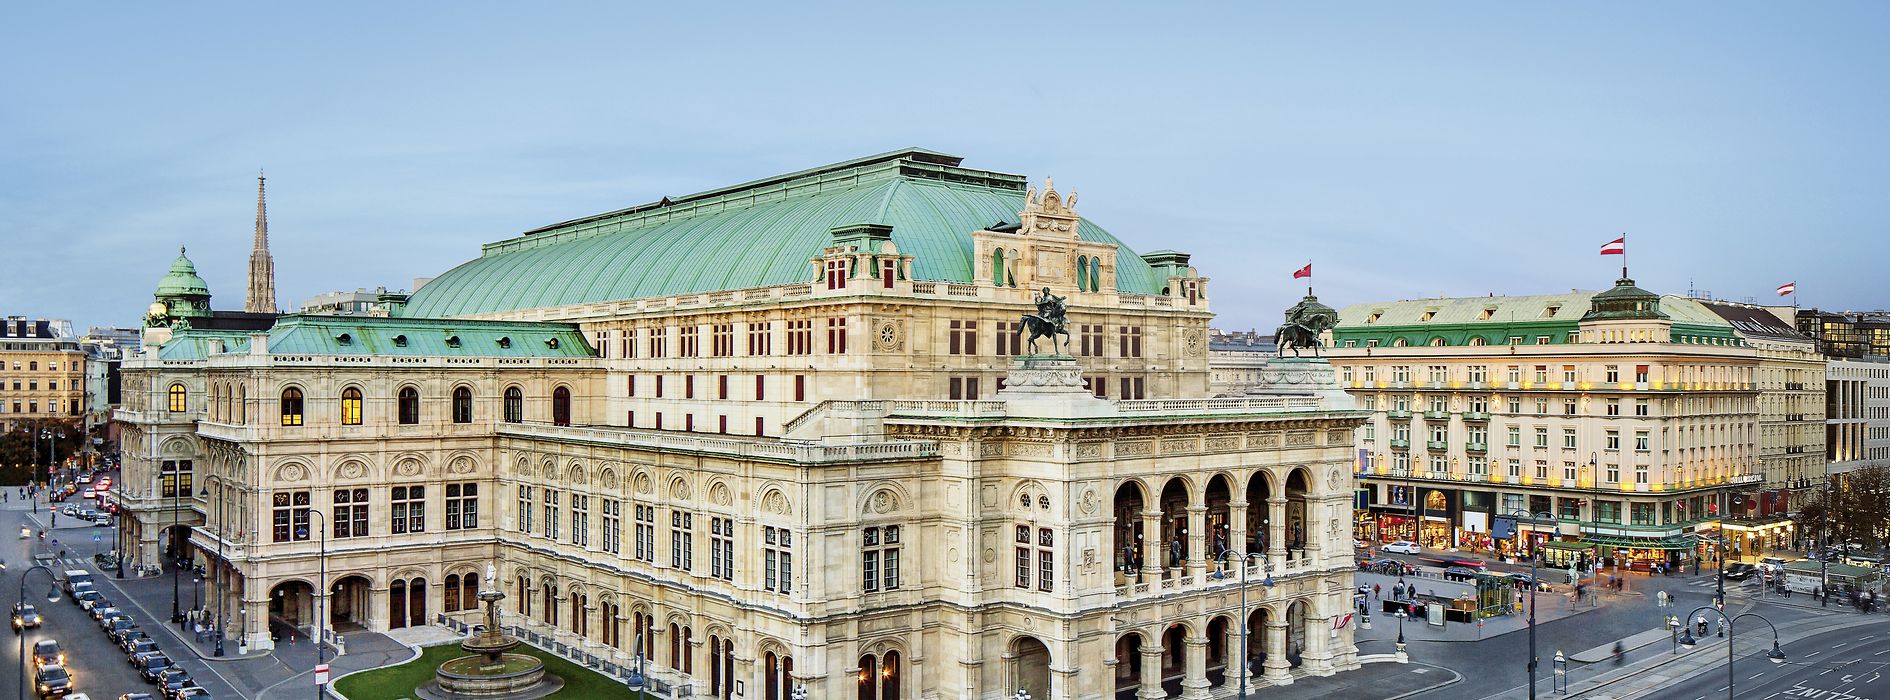 Vienna State Opera at the Ringstrasse